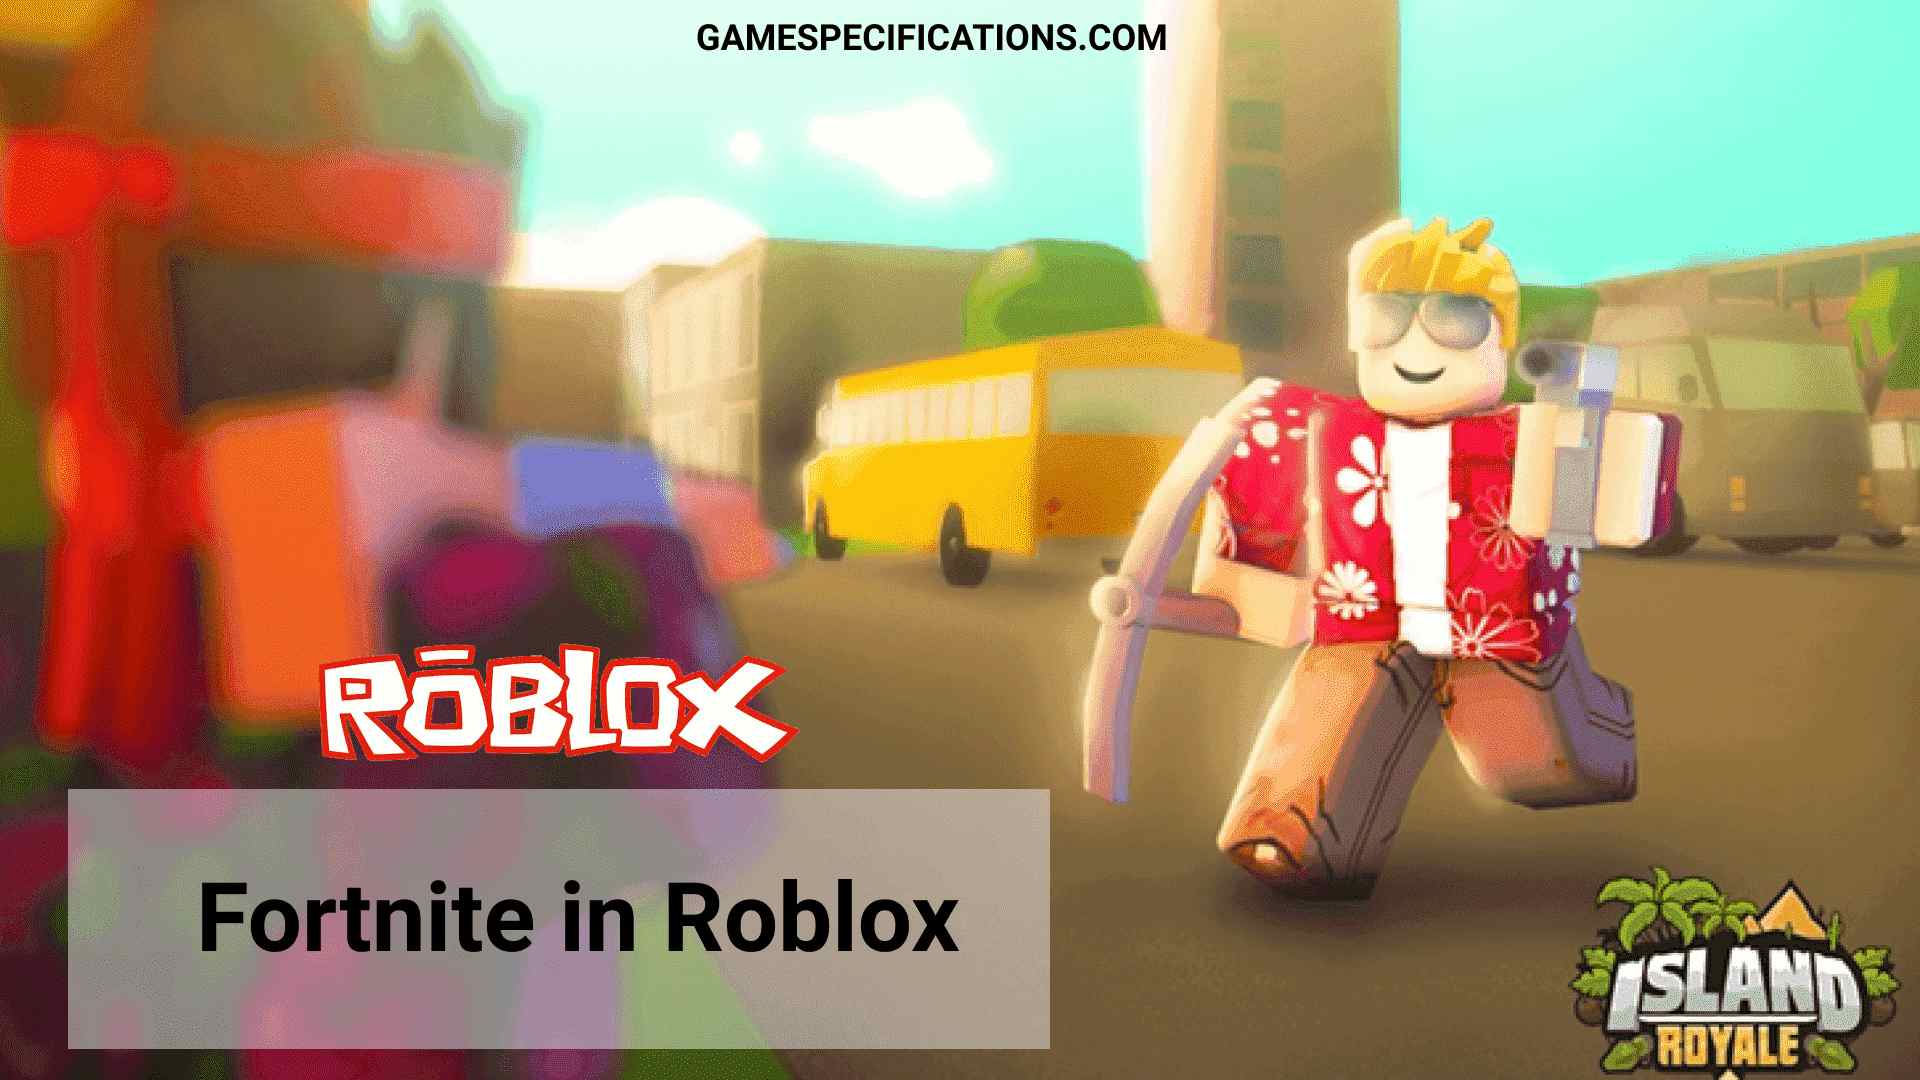 Fortnite Roblox A Native Battle Royale Game Specifications - fortnite game on roblox